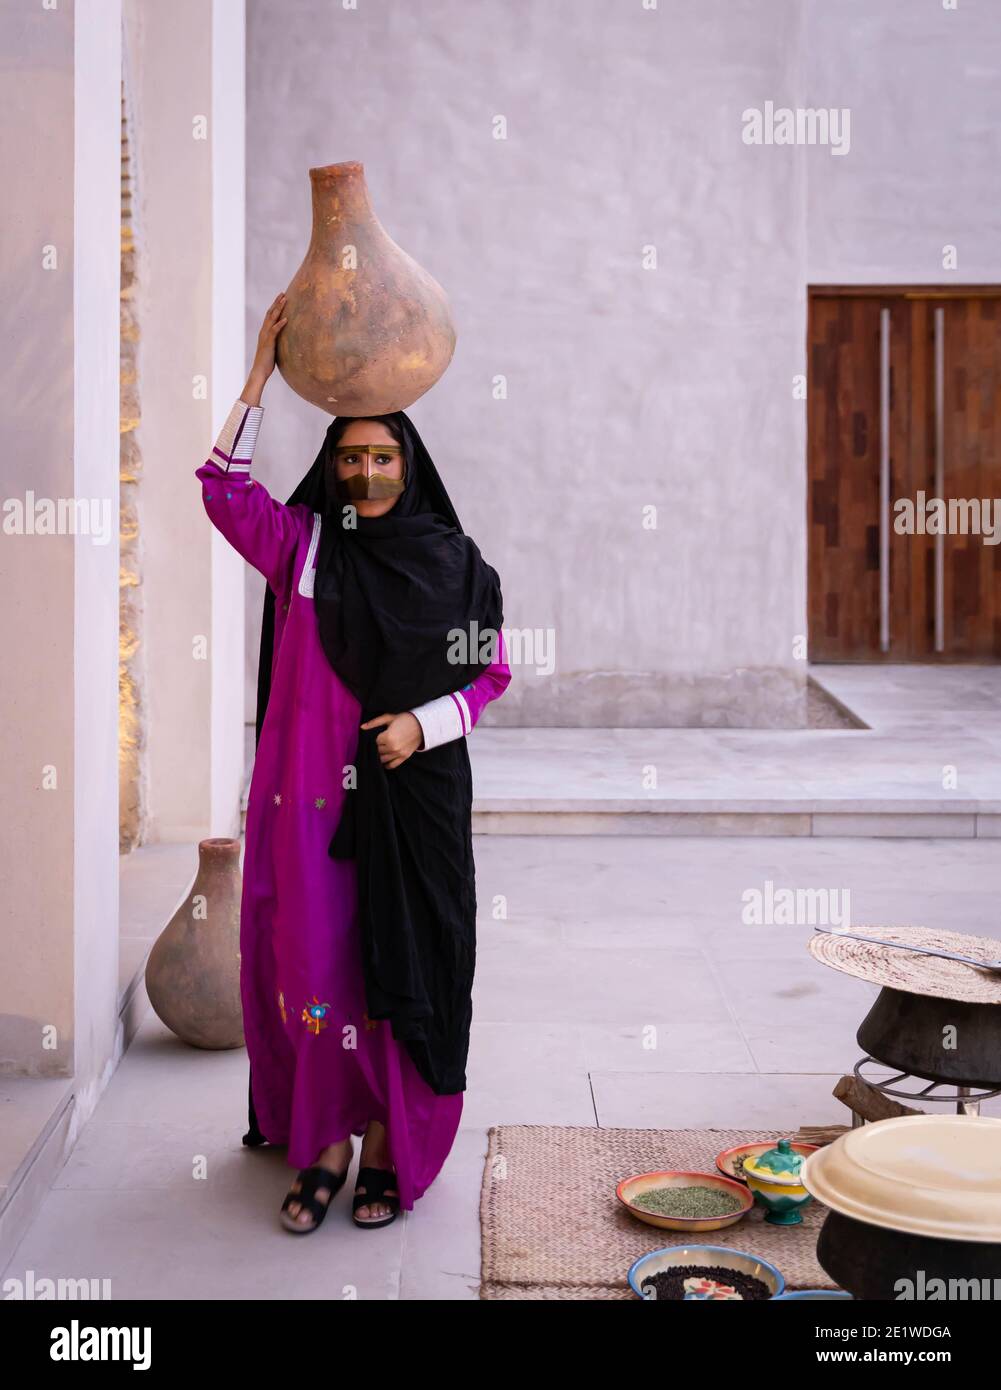 Emarati lady in traditional clothes holding a jar over her head and roaming around the house Stock Photo